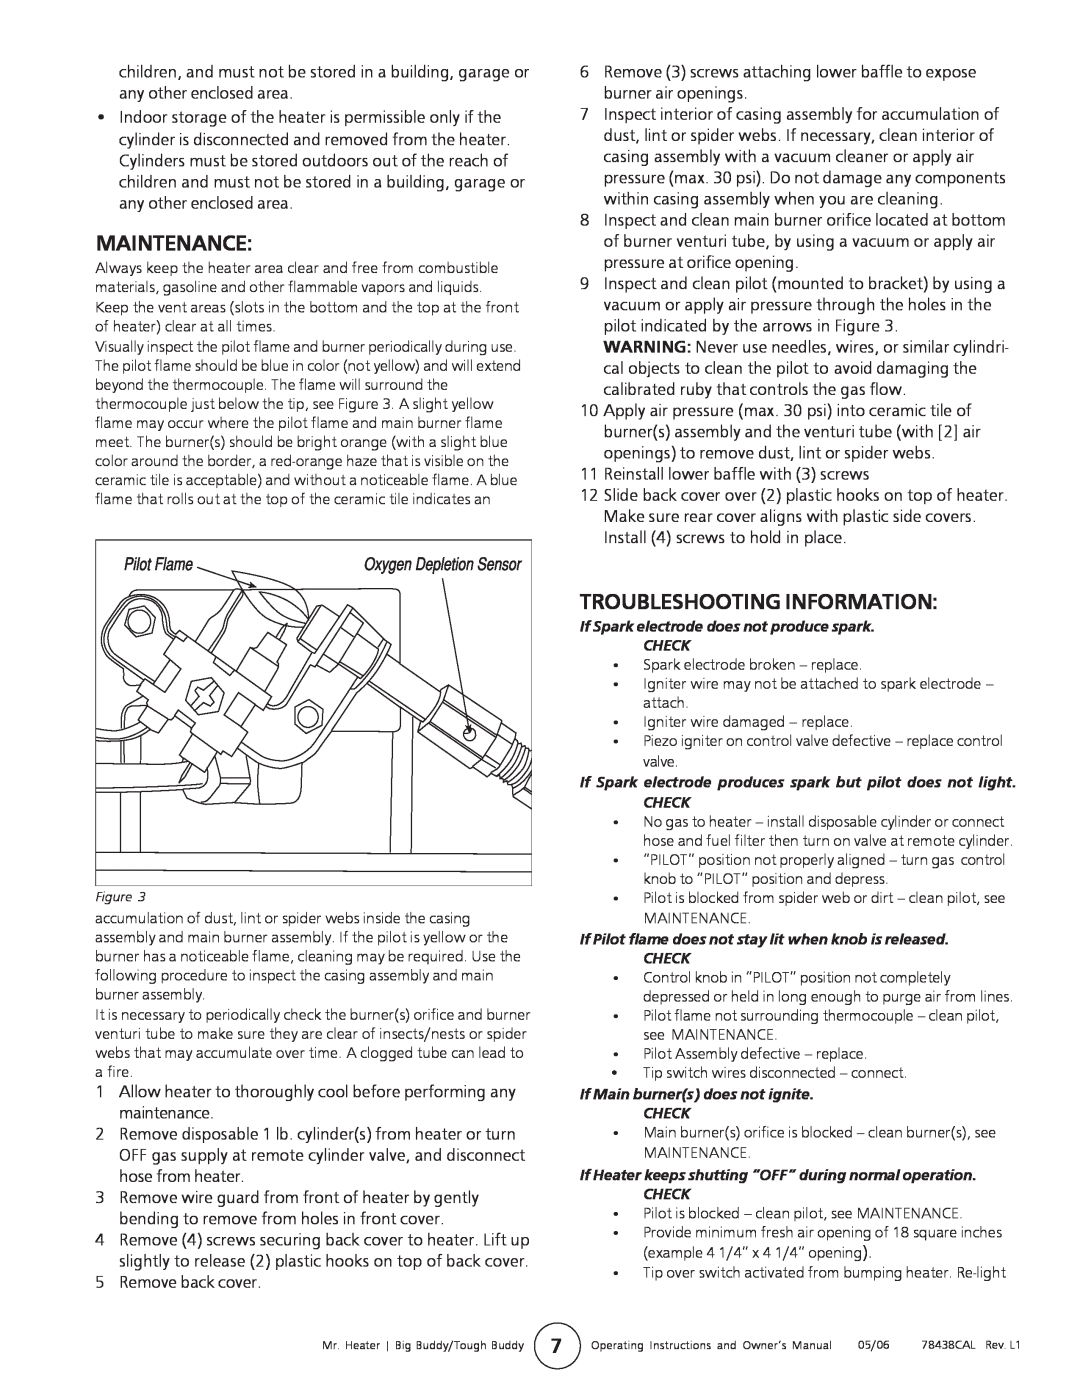 Enerco MH18B operating instructions Maintenance, Troubleshooting Information 